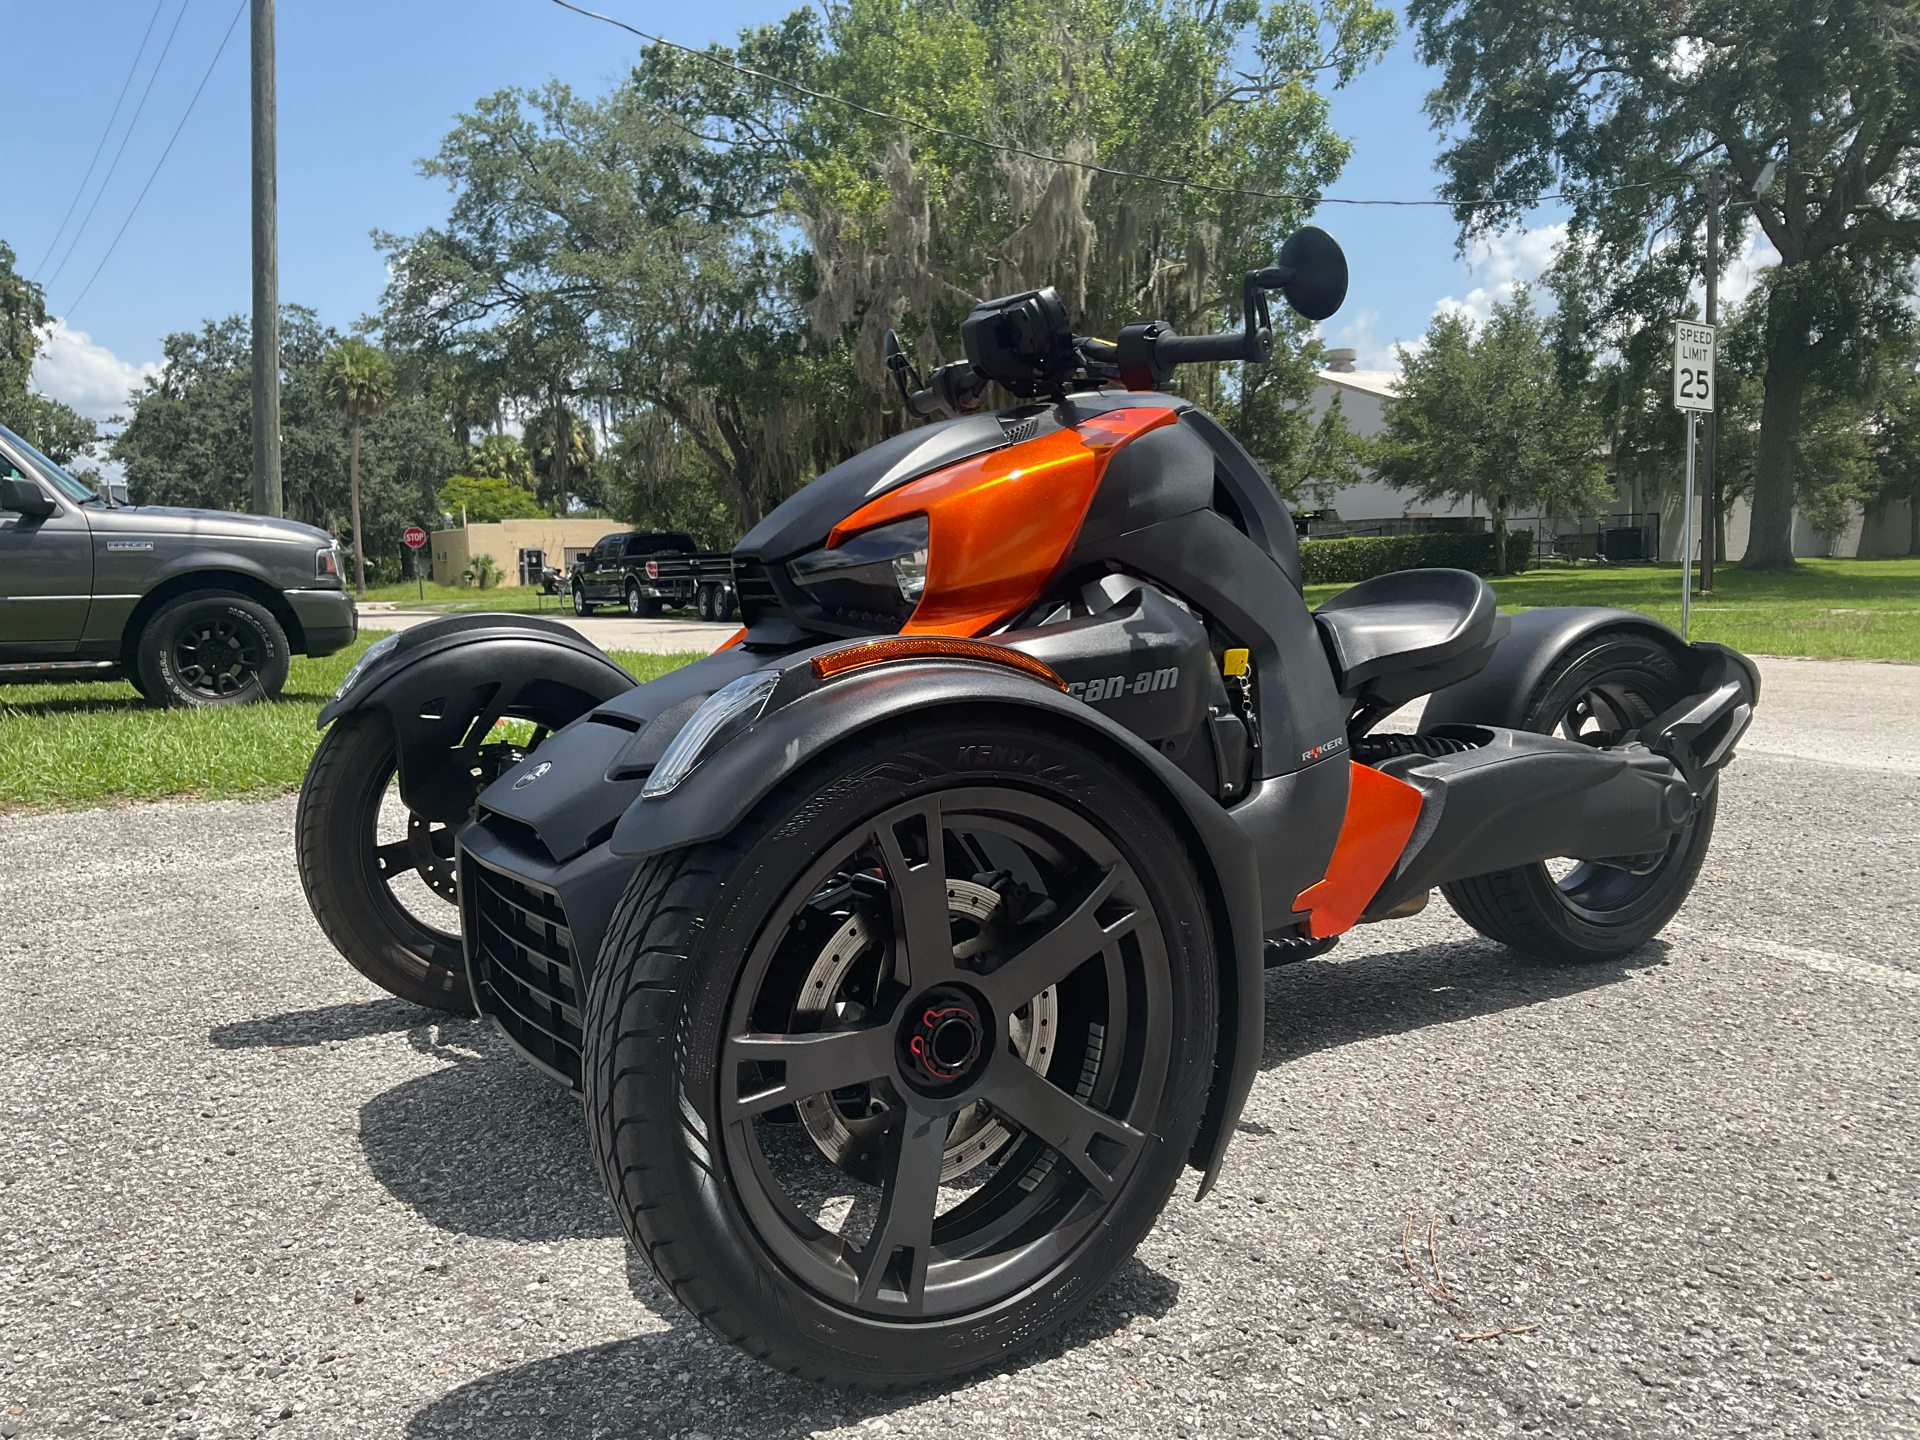 2020 Can-Am Ryker 600 ACE in Sanford, Florida - Photo 6